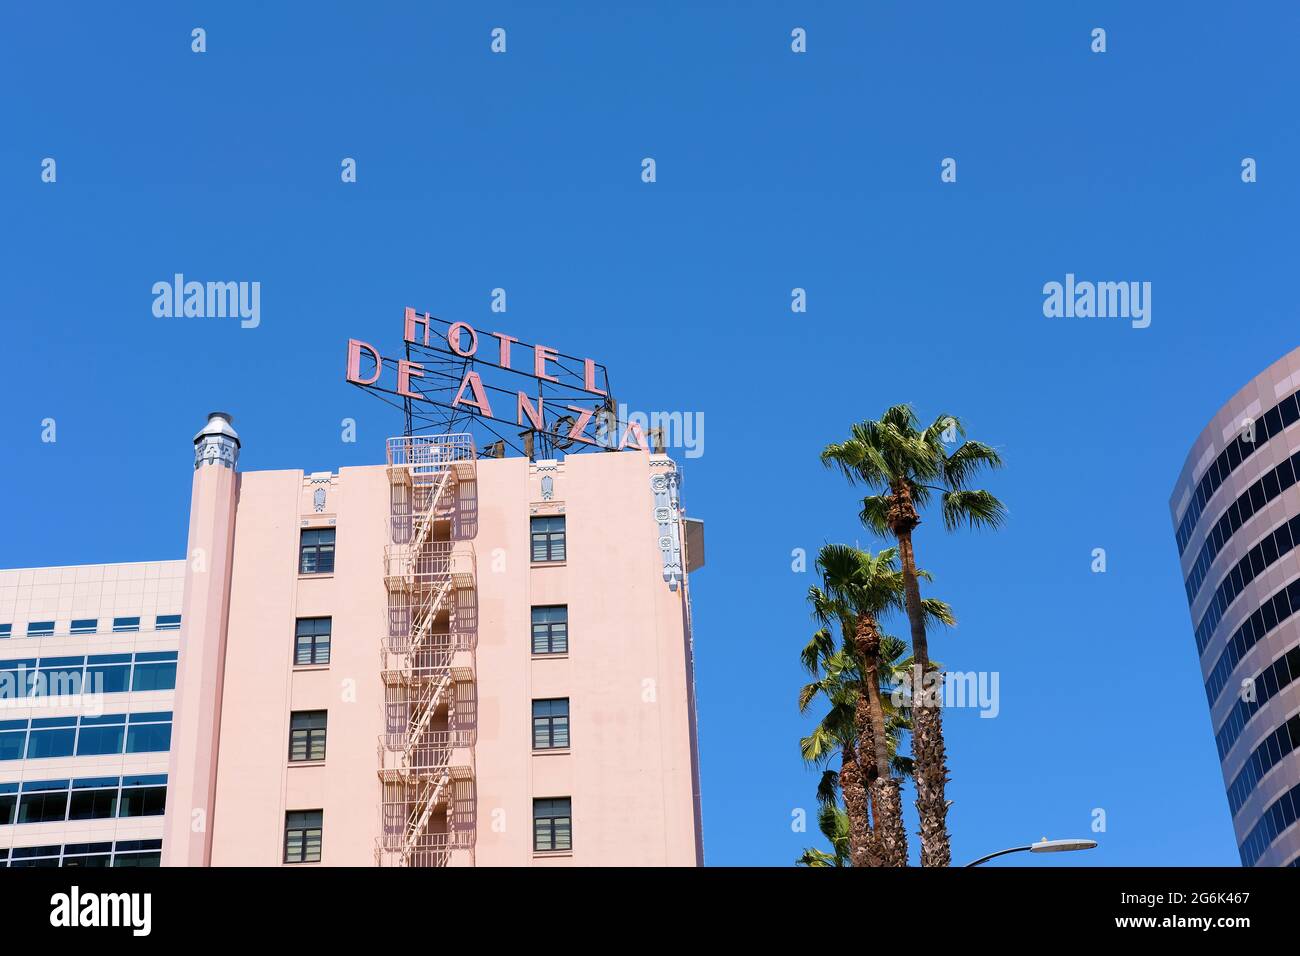 Exterior view of The Hotel De Anza, historic hotel in San Jose, California; built in 1931, known for its Zig Zag Moderne Art Deco architectural style. Stock Photo